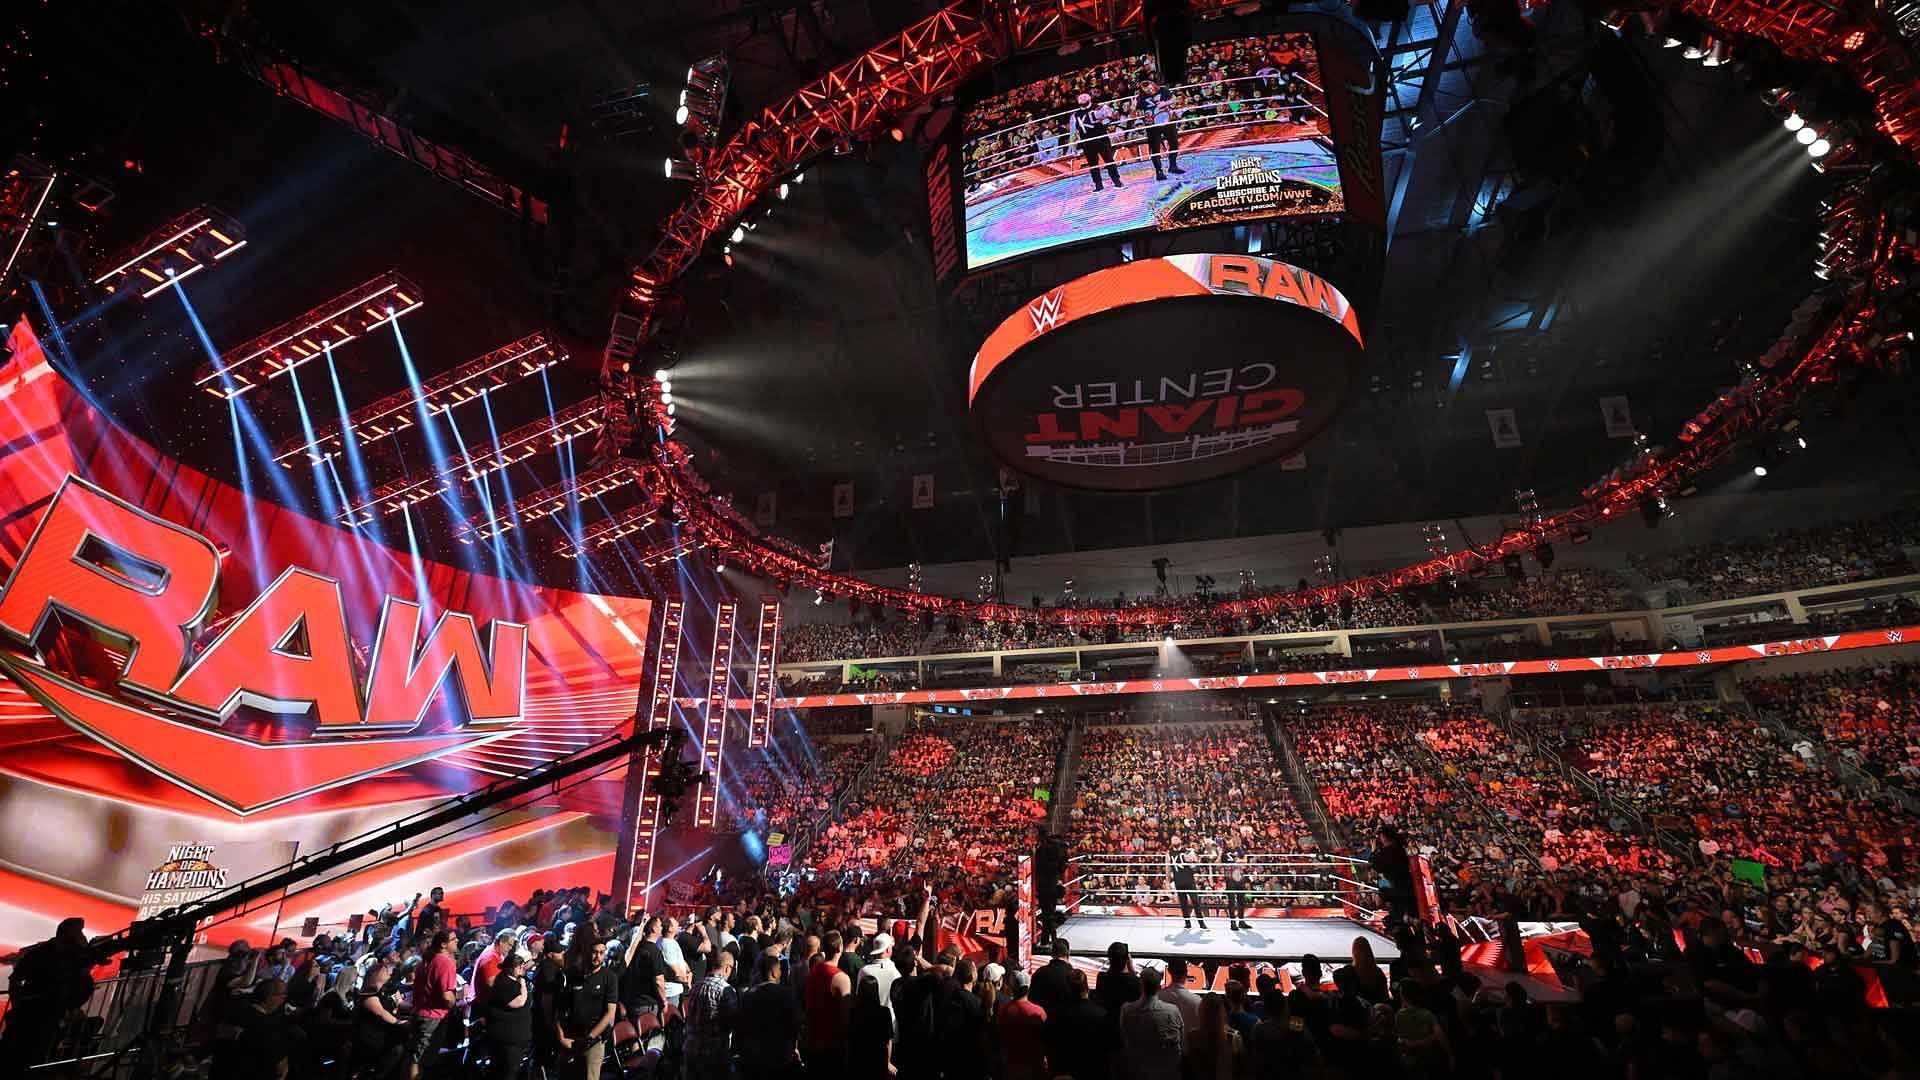 The WWE Universe packs arena for live RAW episode